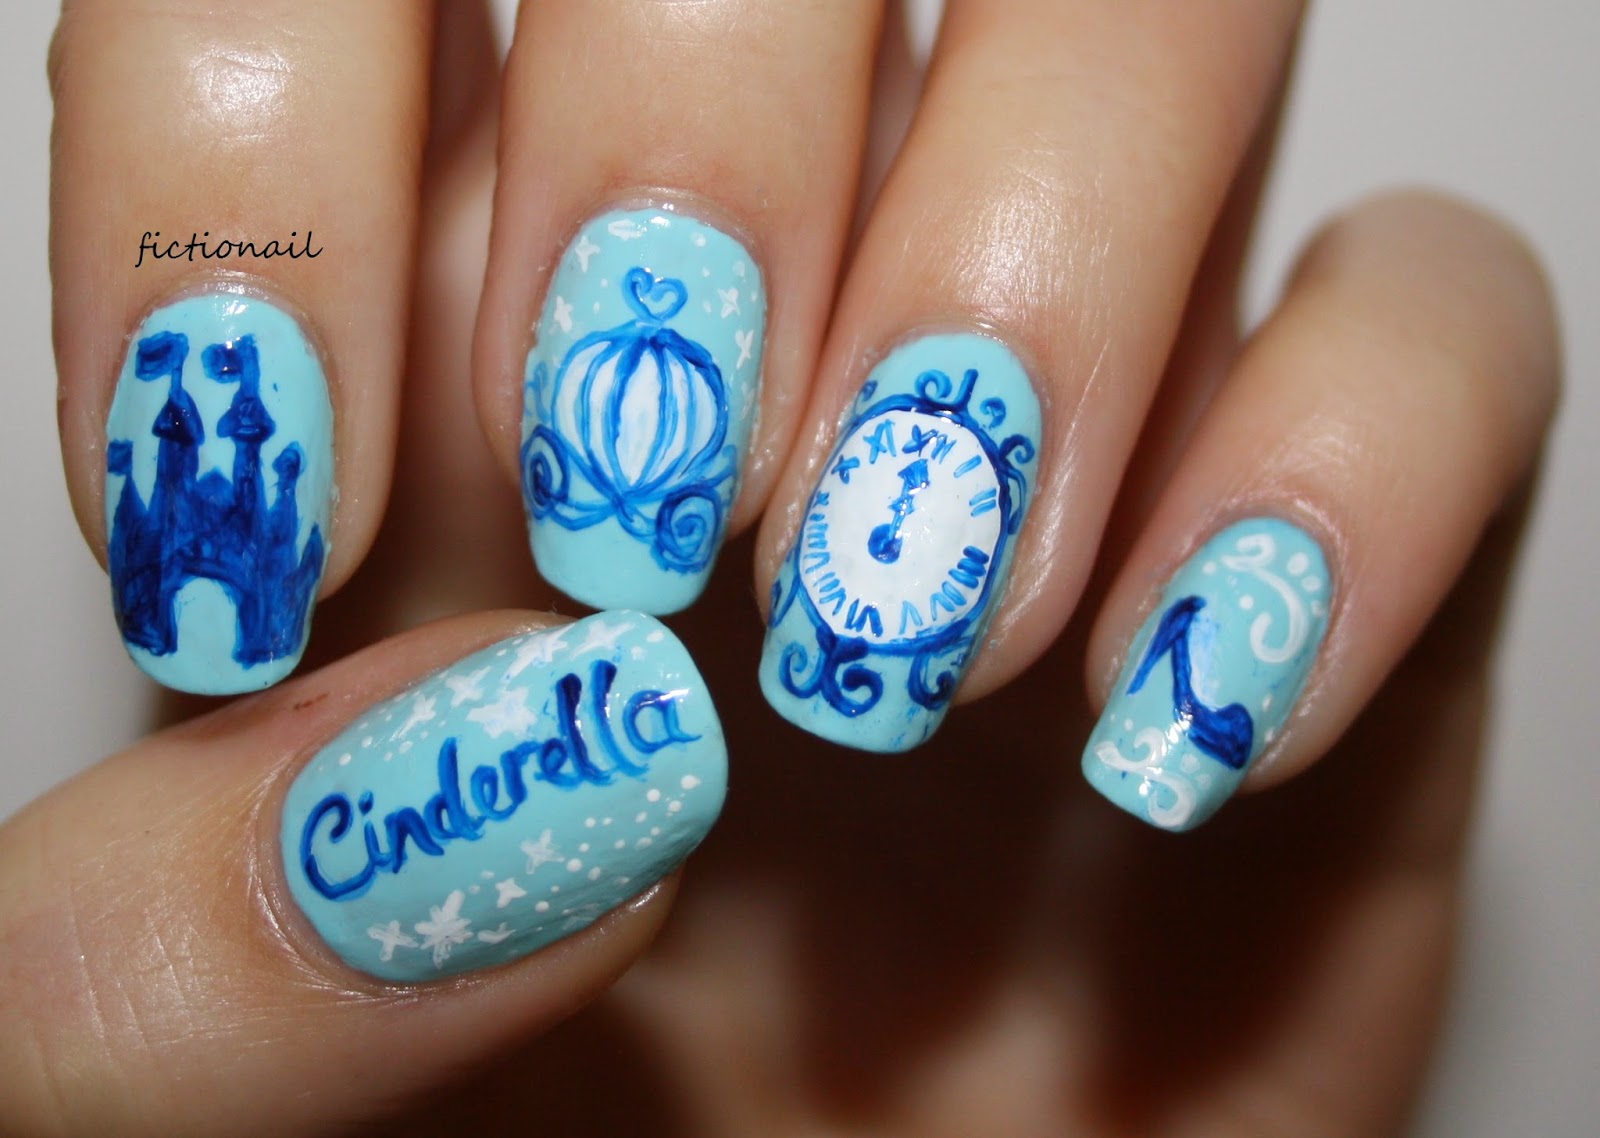 3. How to Create 3D Cinderella Nails - wide 5